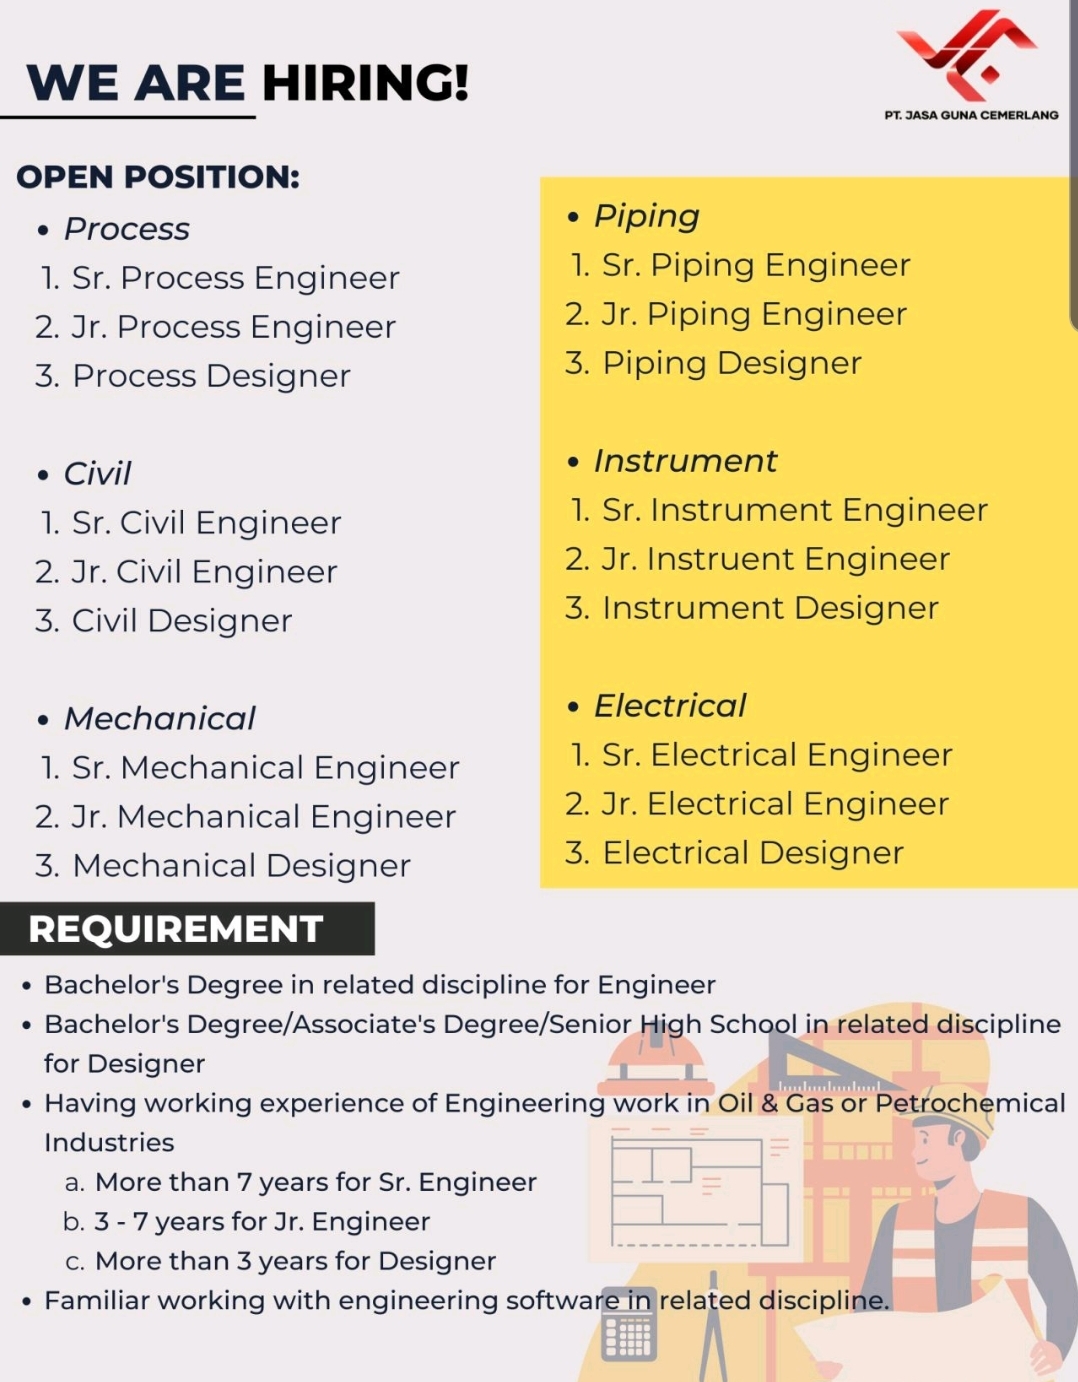 Process, Civil, Electrical, Mechanical, Instrument & Piping Engineer Jobs